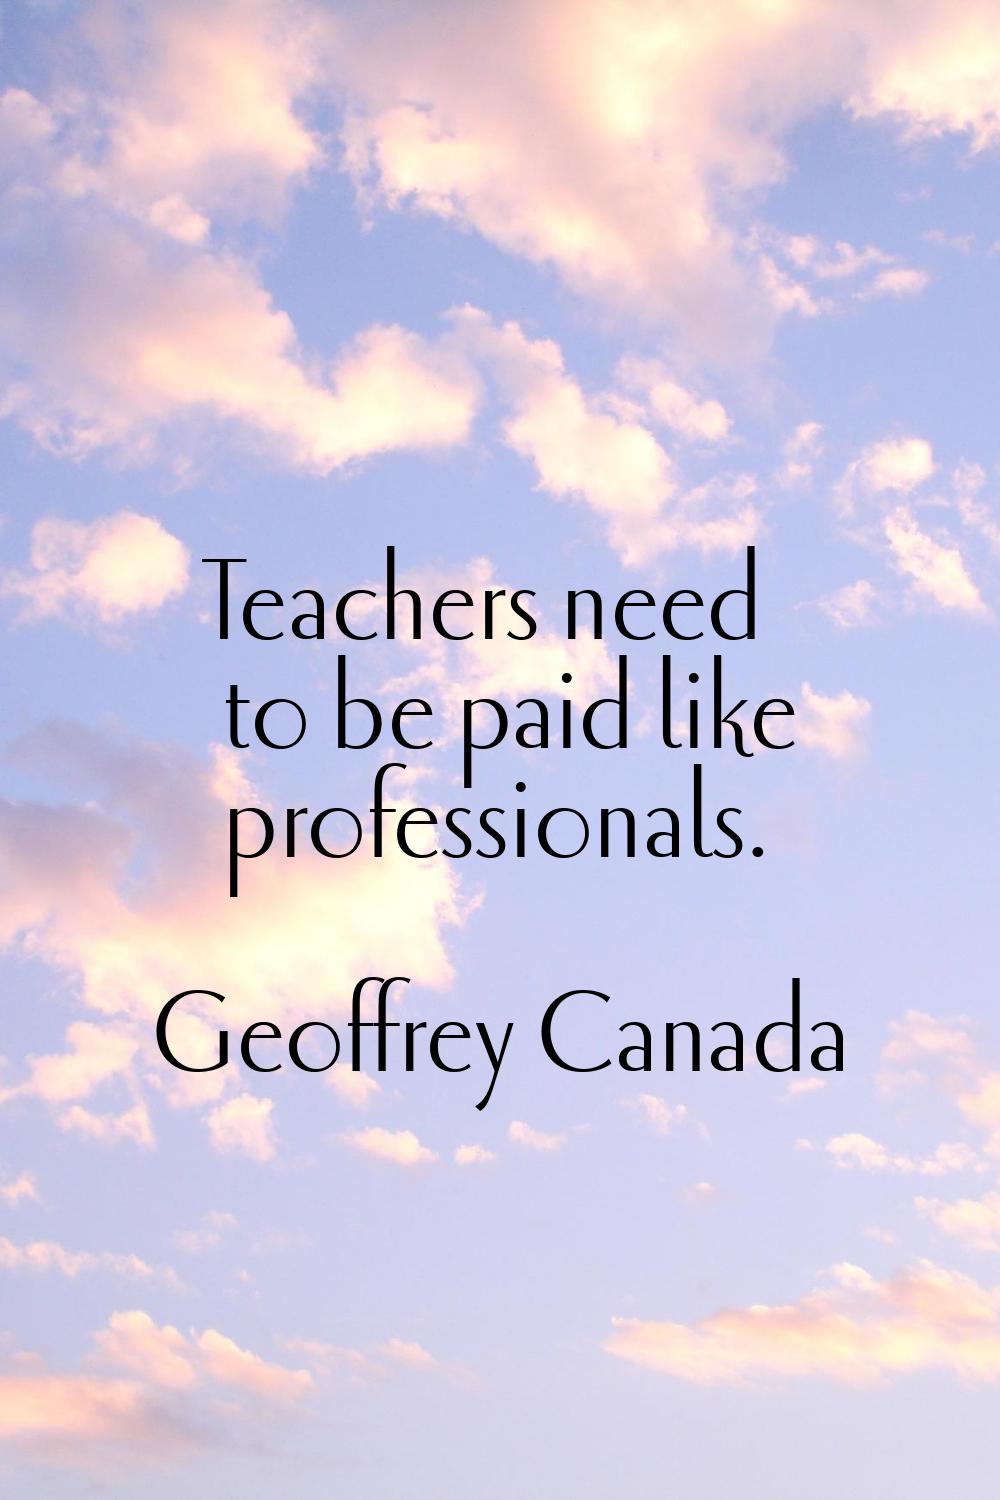 Teachers need to be paid like professionals.